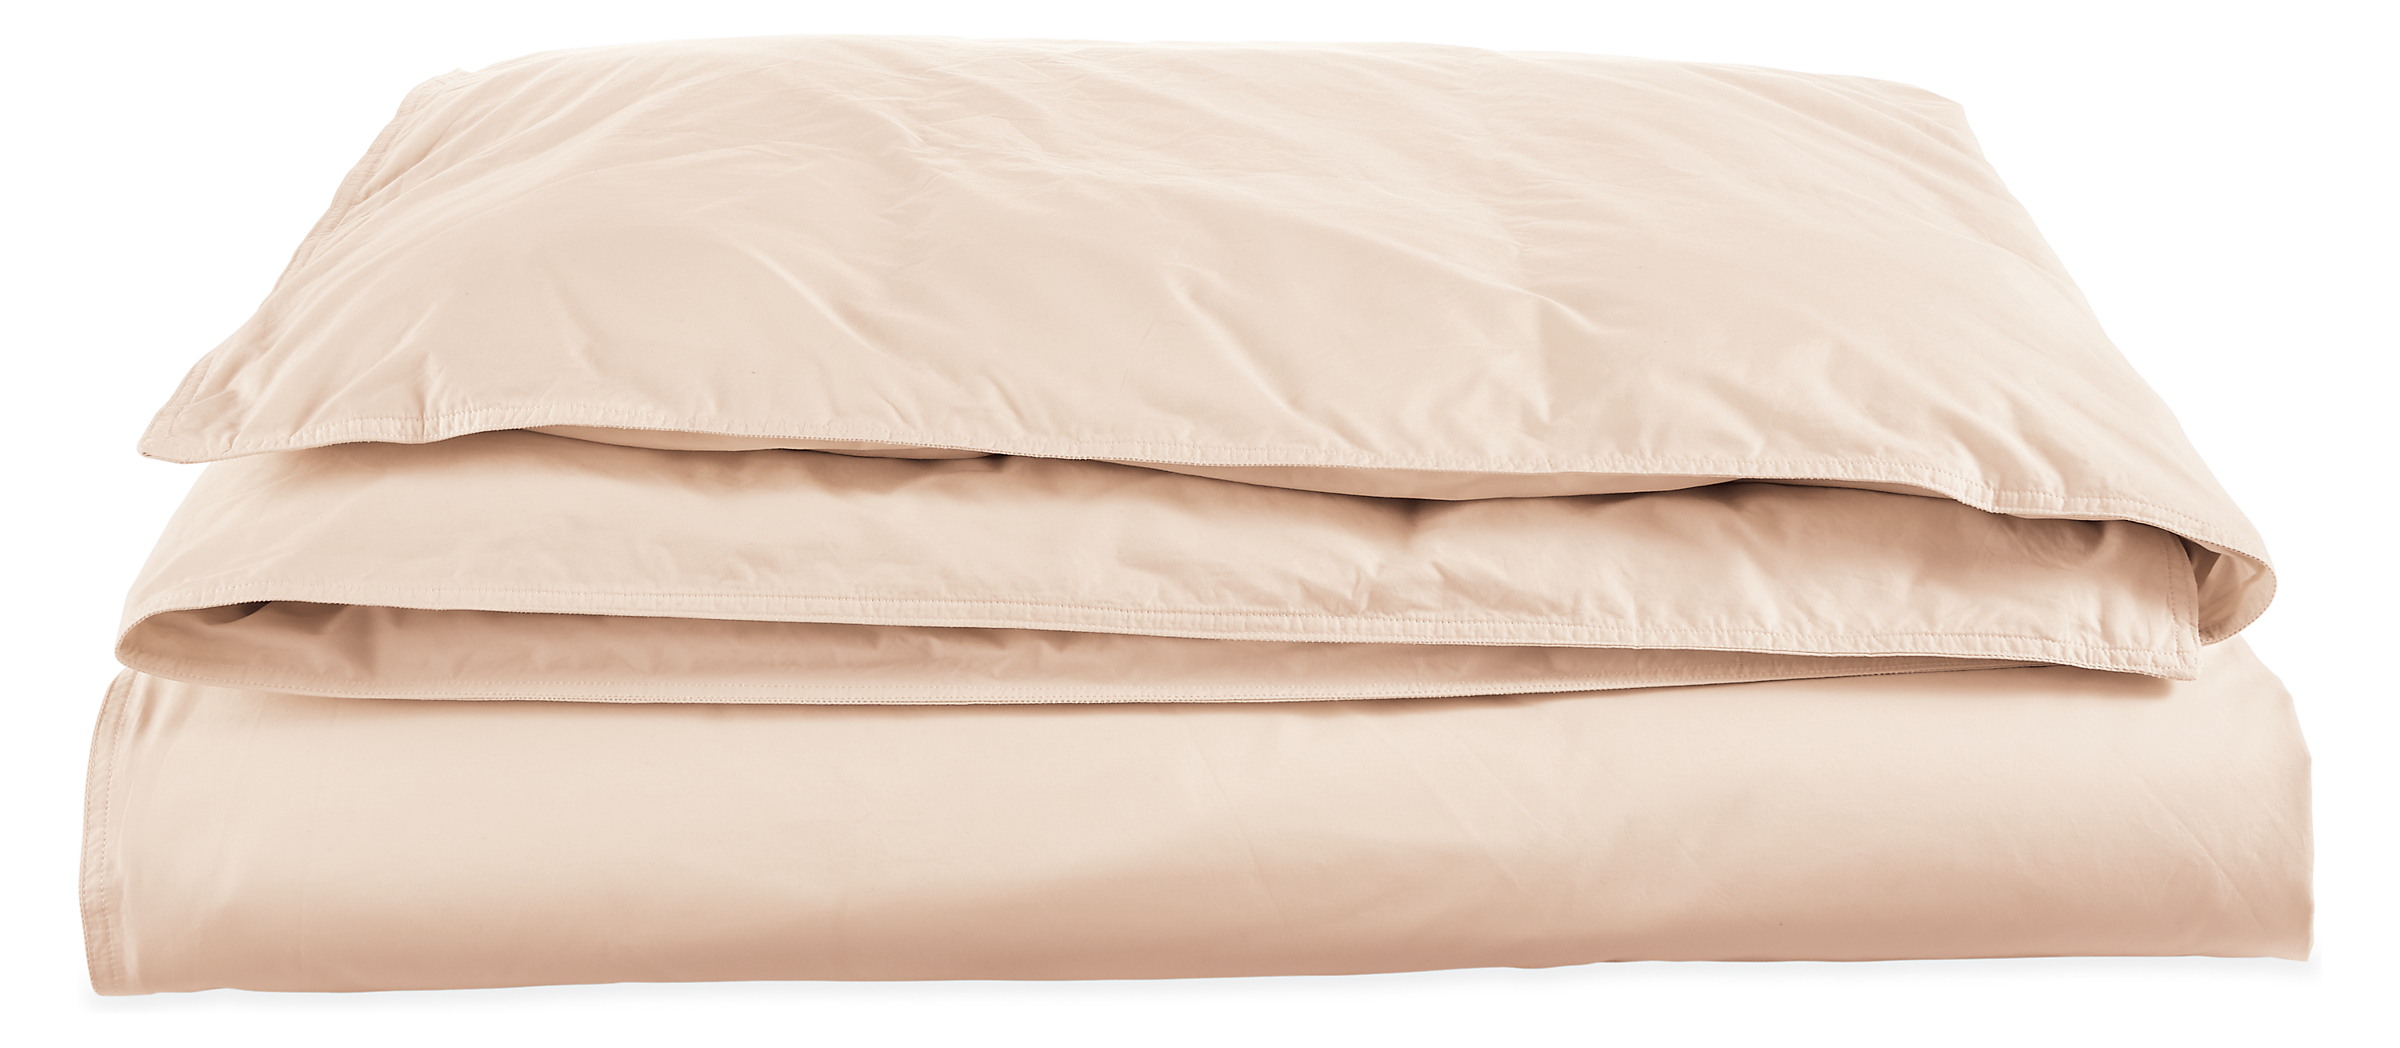 Signature Percale King Duvet Cover in Blush